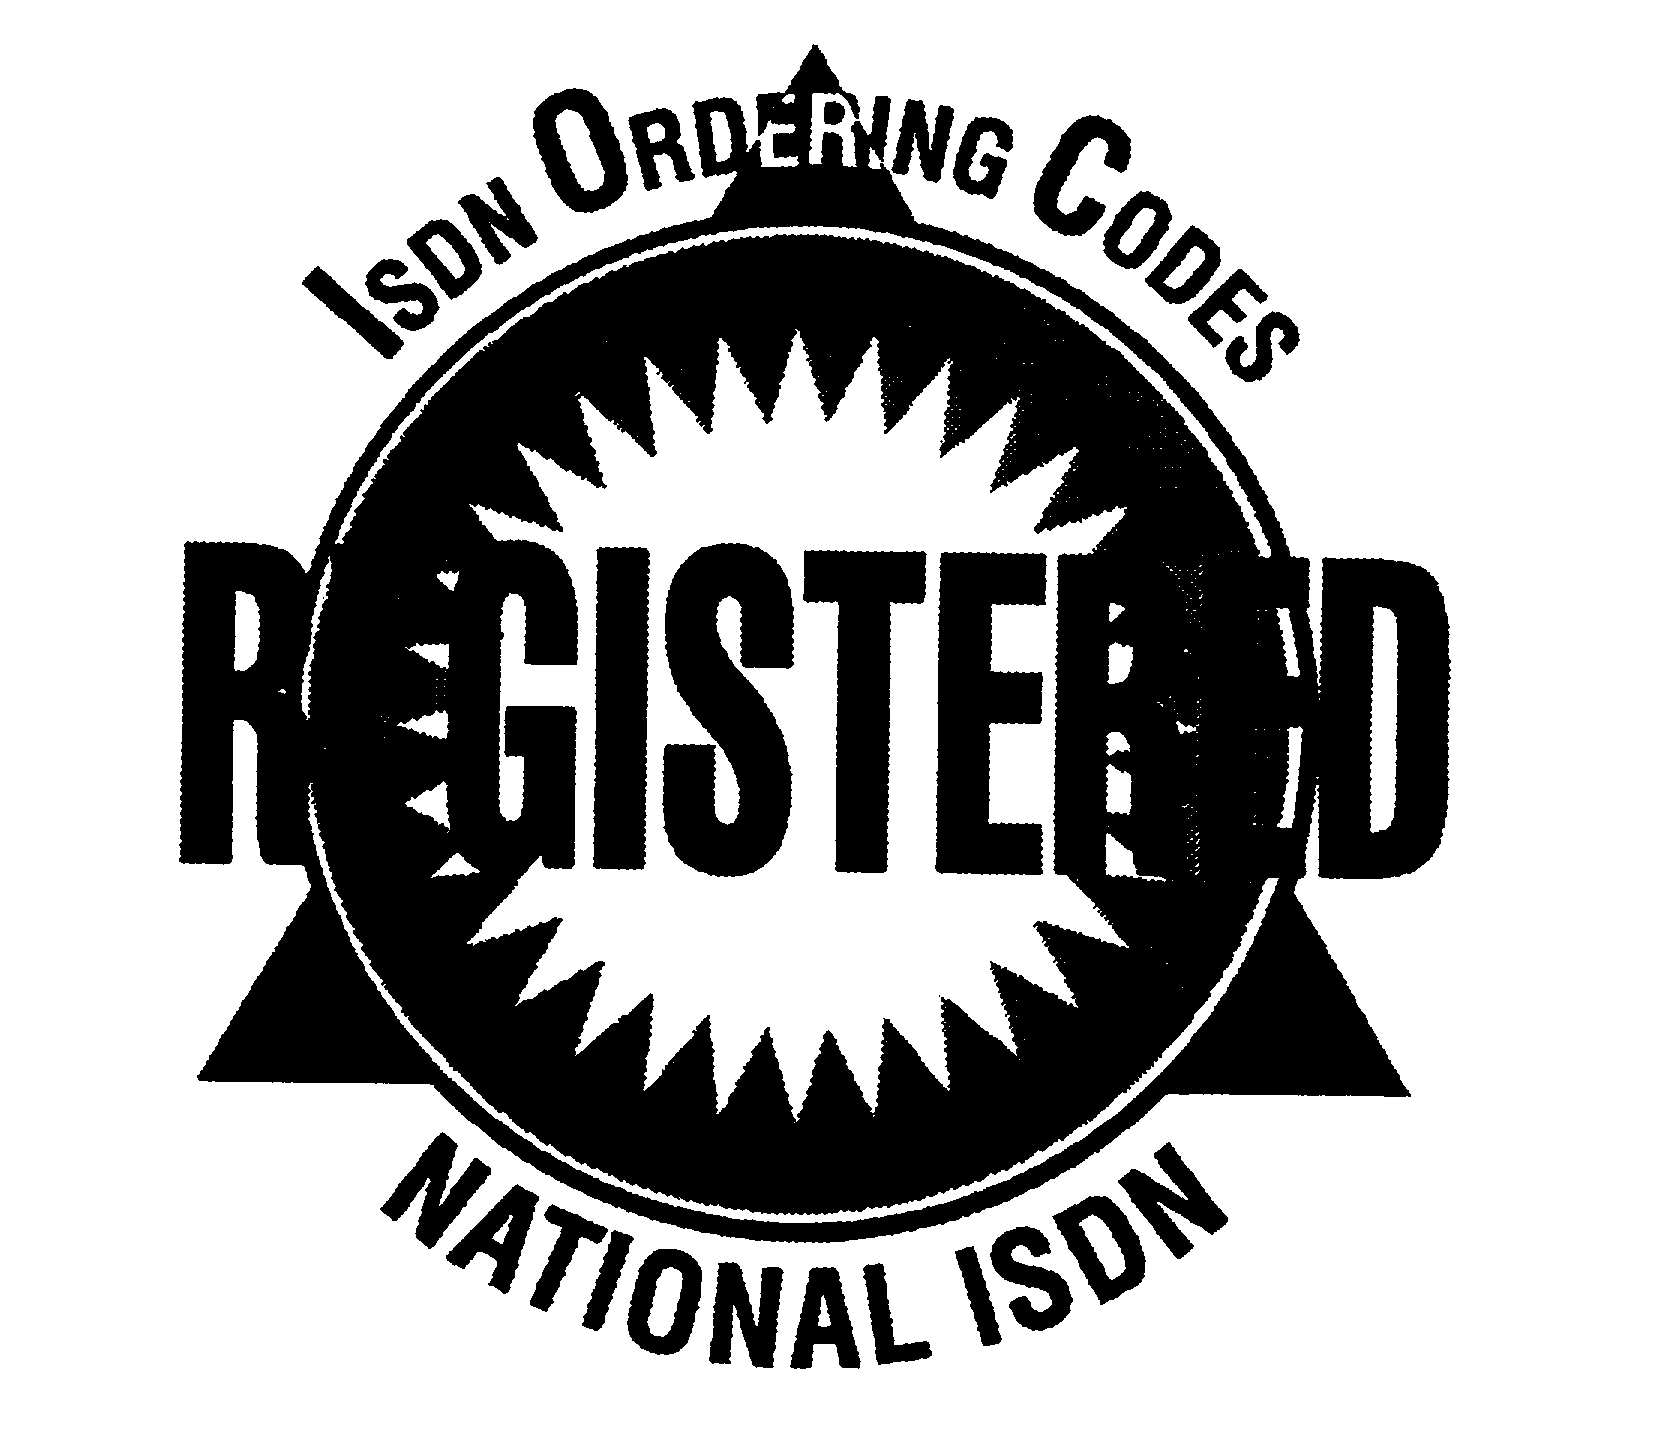  REGISTERED NATIONAL ISDN ISDN ORDERING CODES